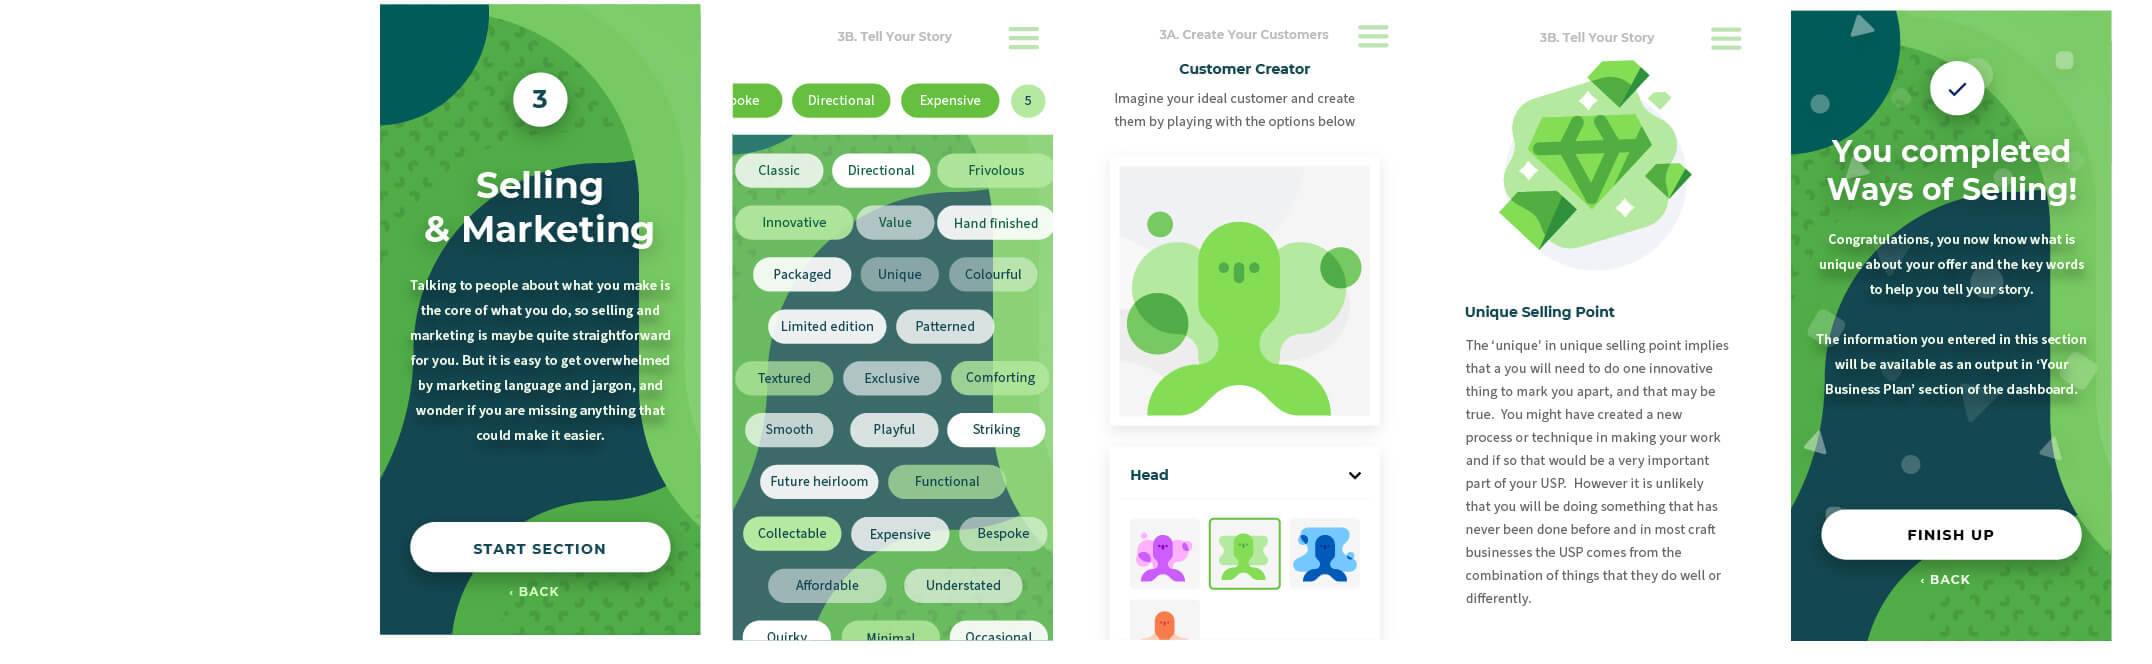 Screenshots of a green mobile interface for a learning platform.